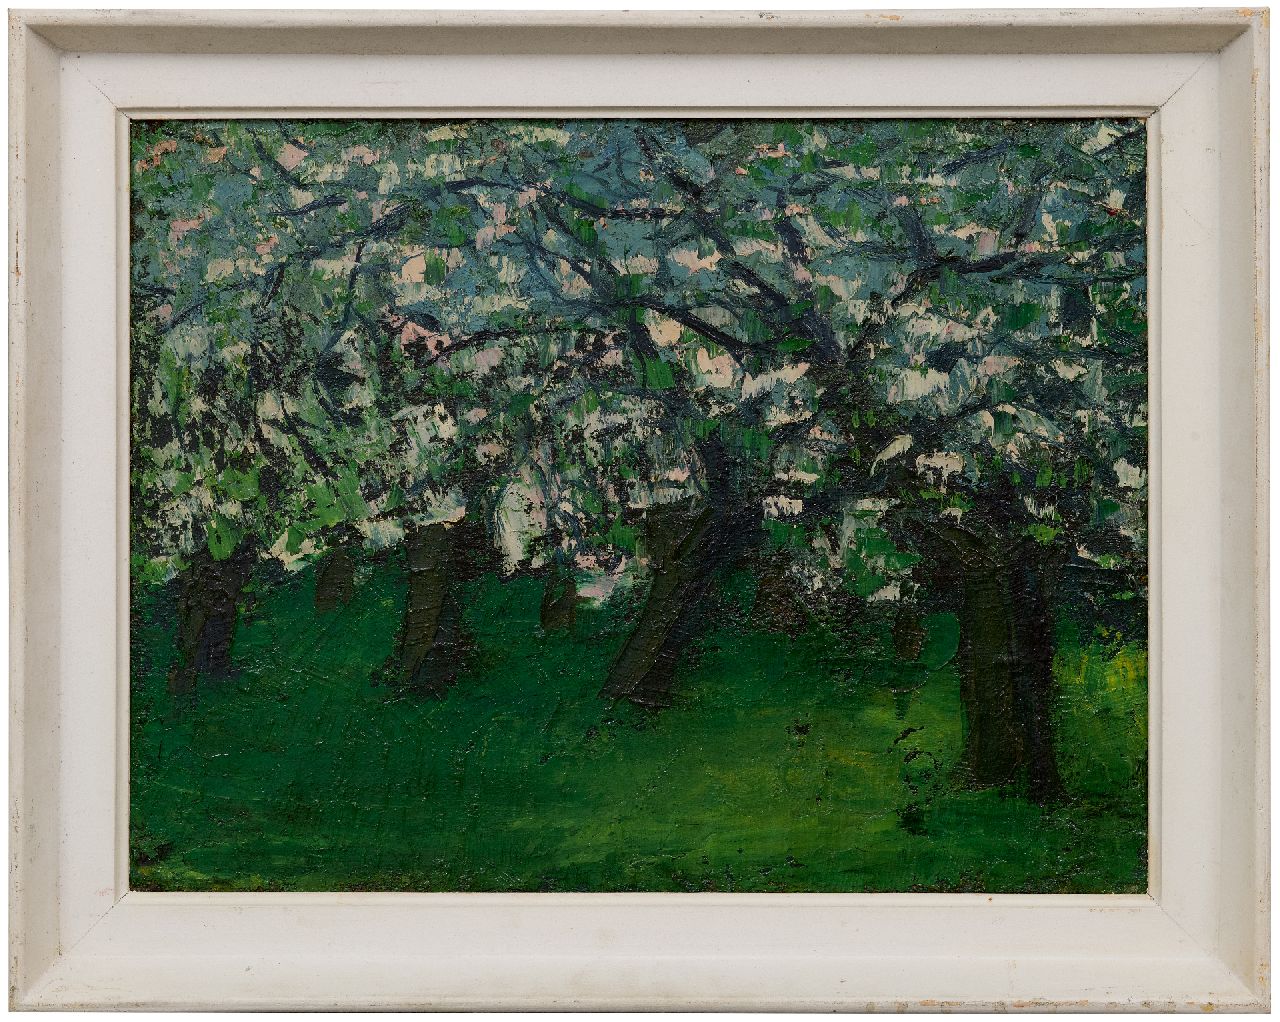 Doeser J.J.  | 'Jacobus' Johannes Doeser | Paintings offered for sale | Orchard, oil on canvas 45.3 x 60.5 cm